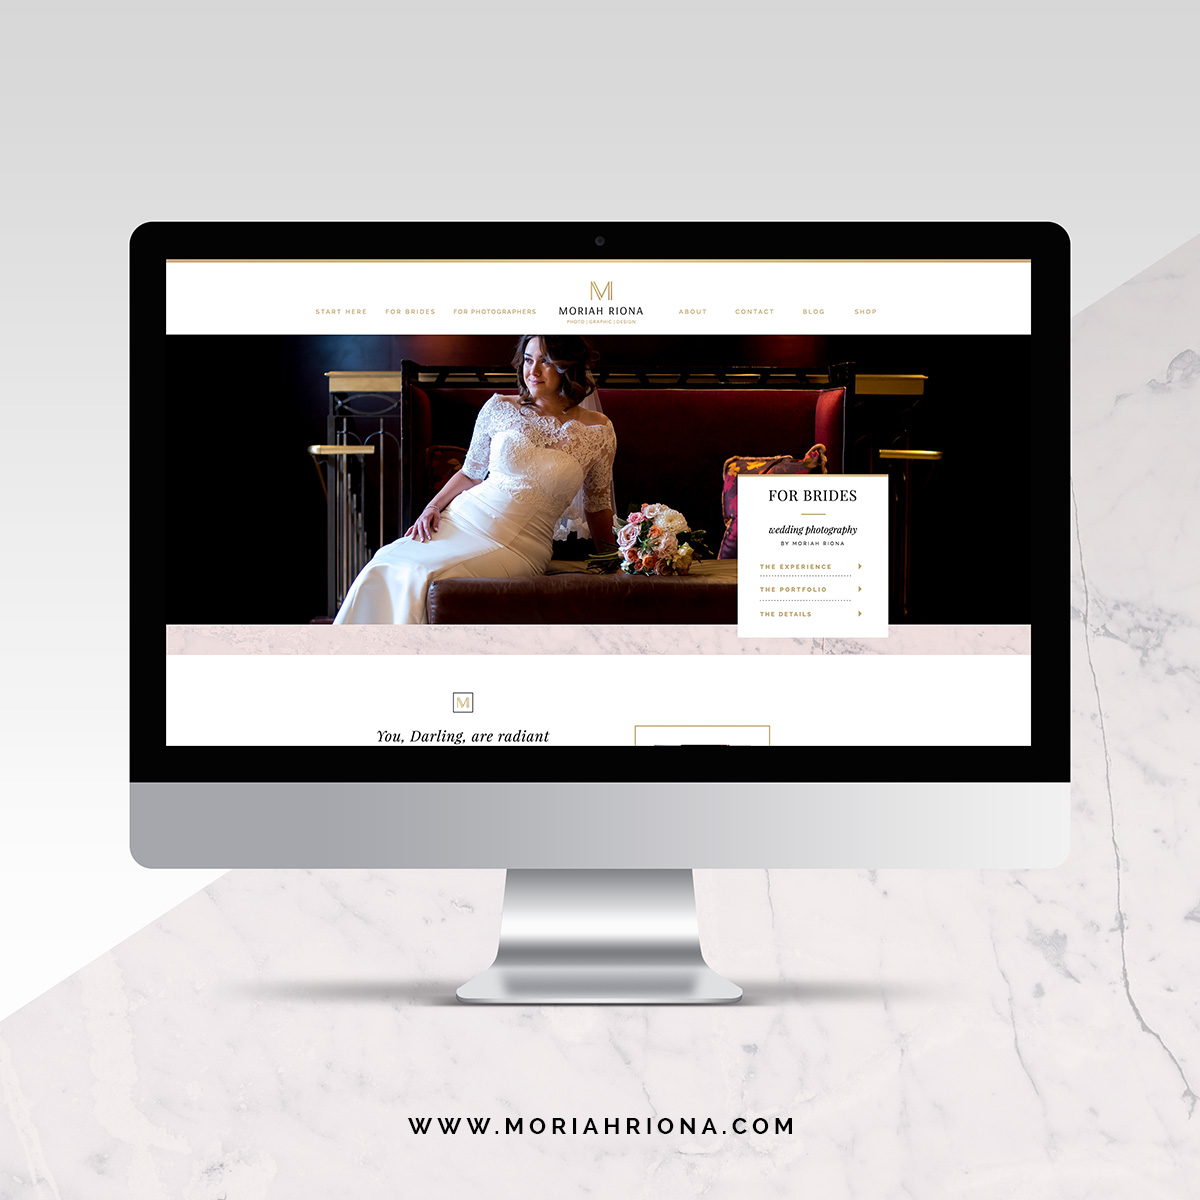 New Website Launch - Designed by Moriah Riona on Showit 5. 5 Critical Things Your Website Is Missing. Website and branding tips and education for photographers and creative female entrepreneurs. #website #webdesign #photographywebsite #branding #biztips #smallbiz #womeninbiz